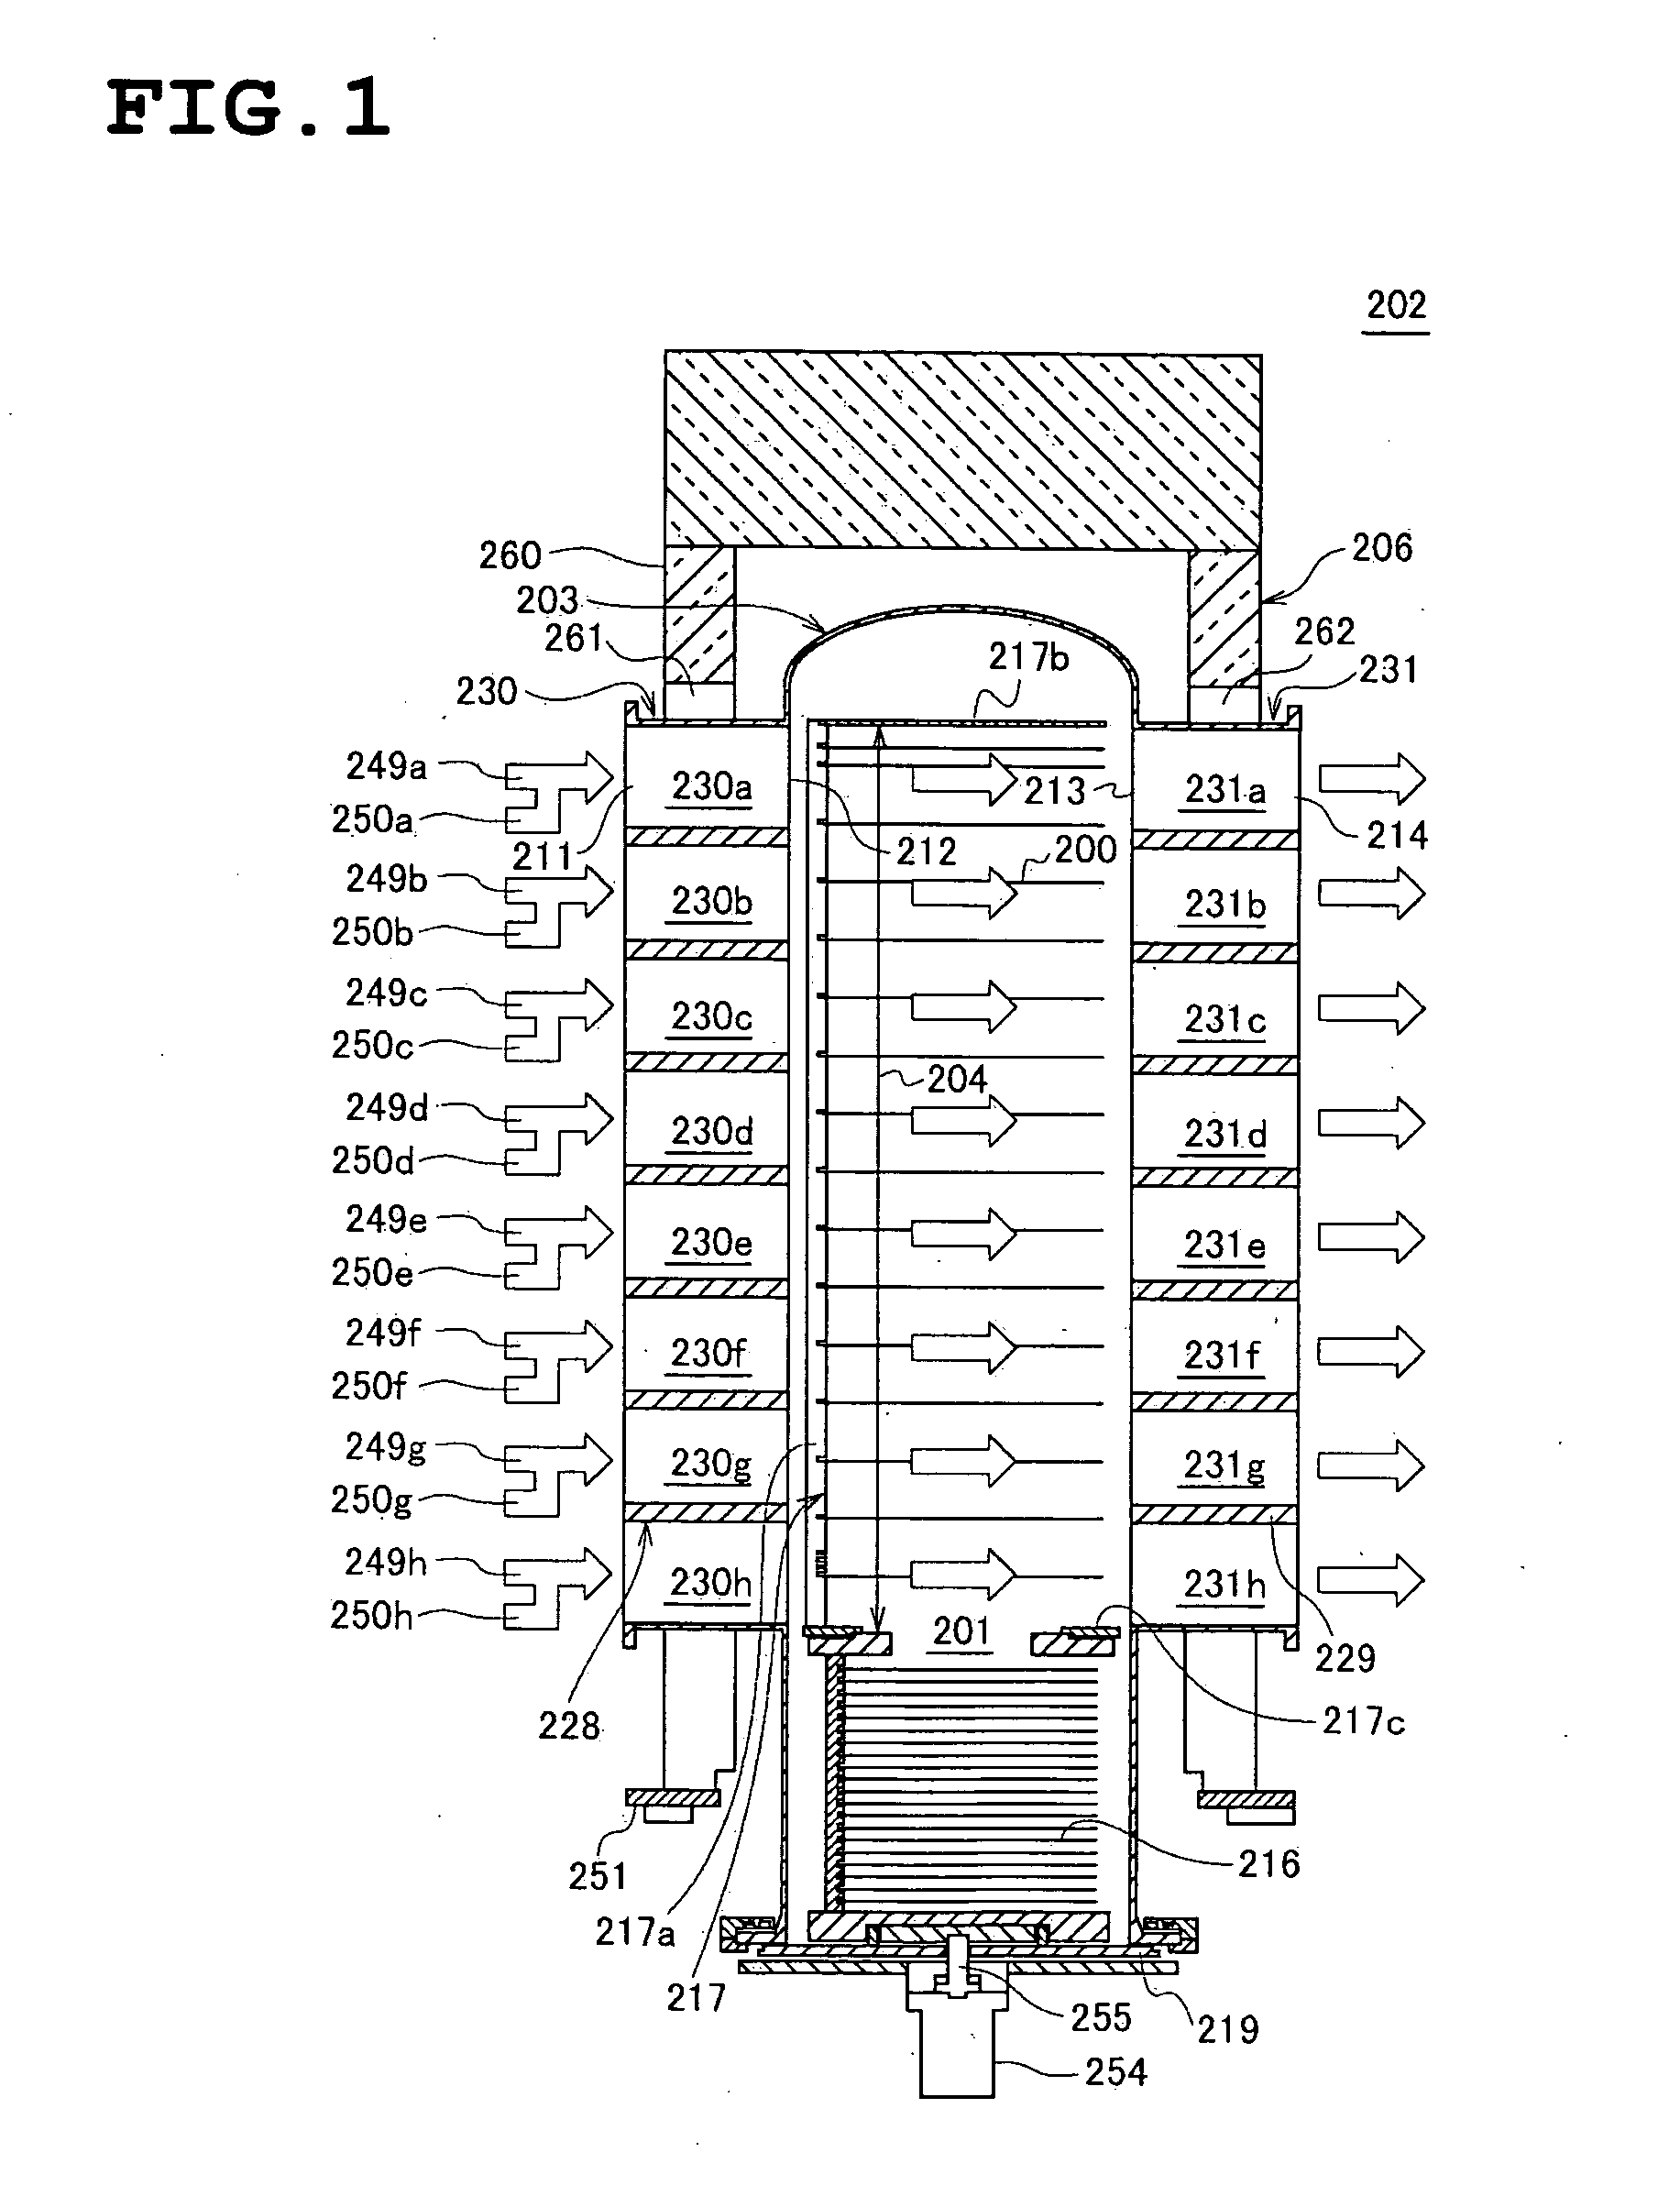 Substrate processing apparatus, method of manufacturing semiconductor device, and reaction vessel